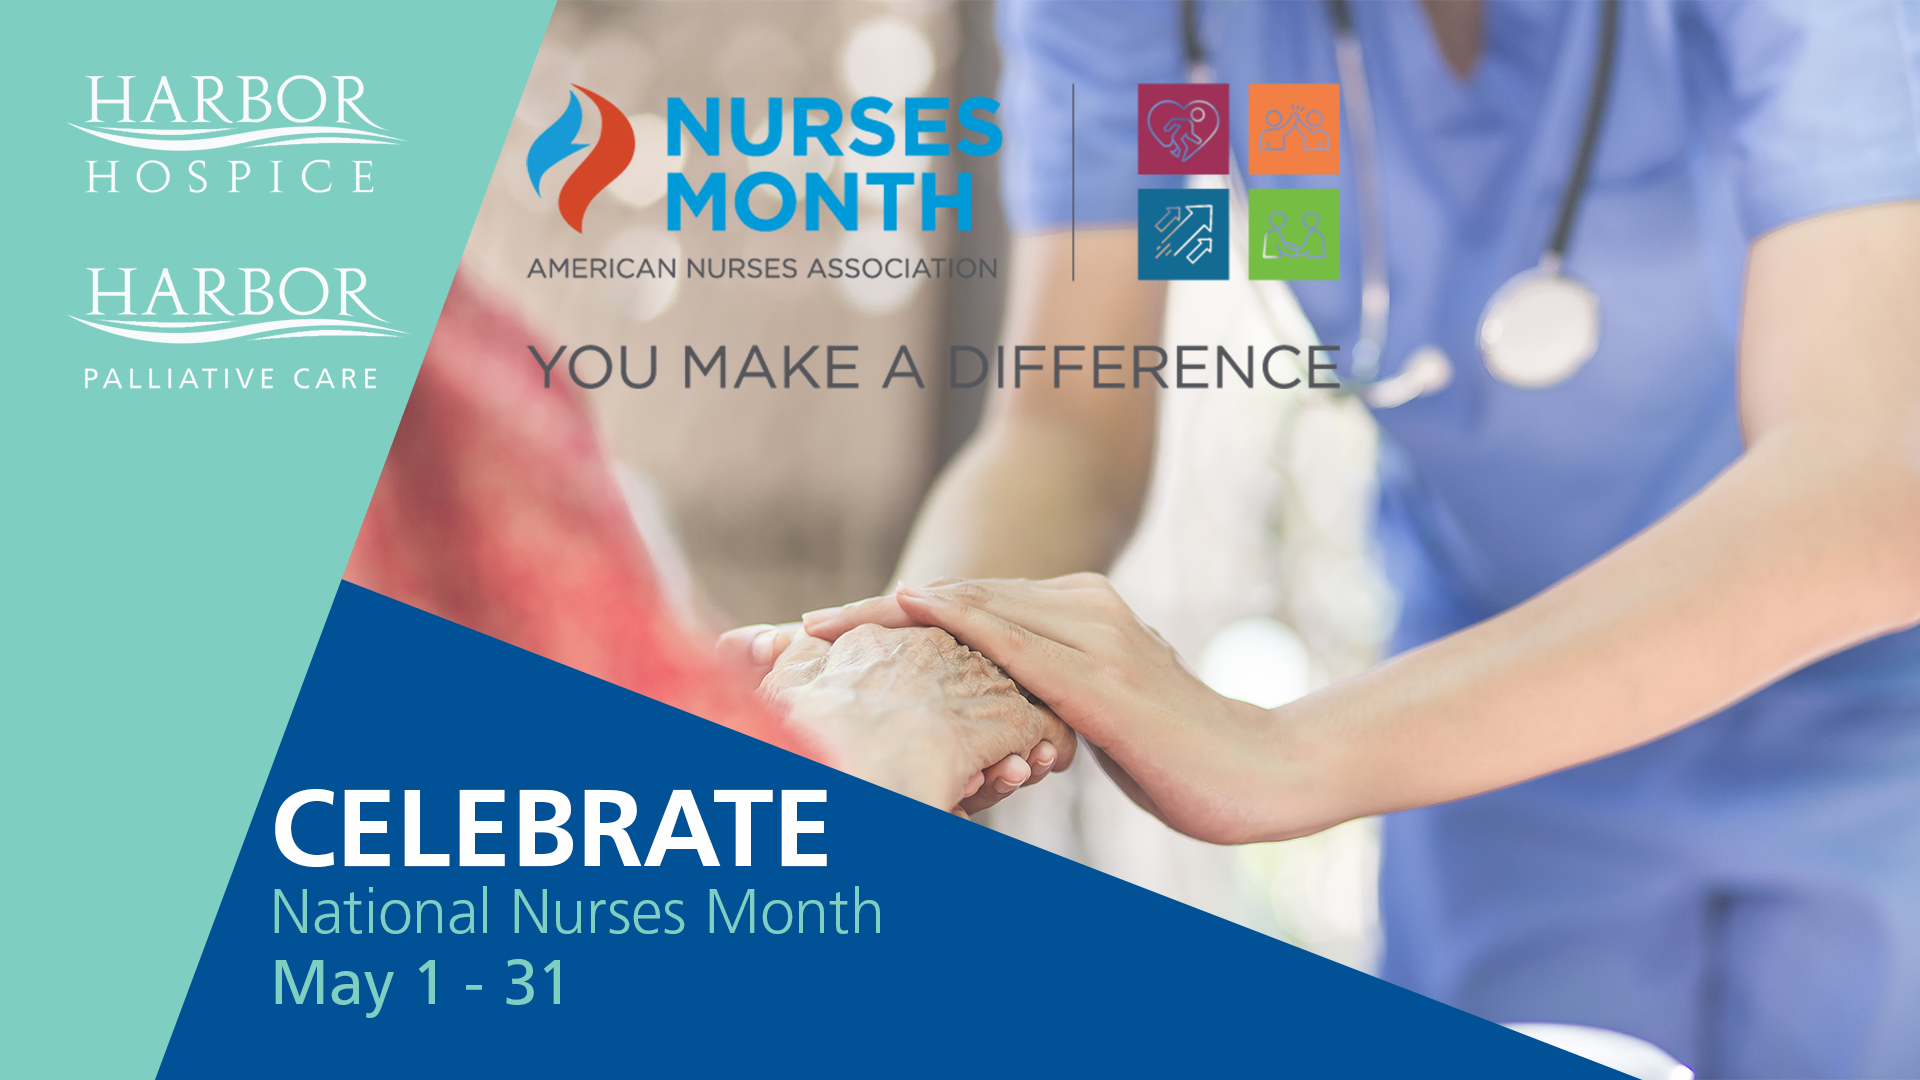 Announcement National Week Month nurses - May is Nurses Month. Nurses Make a Difference!